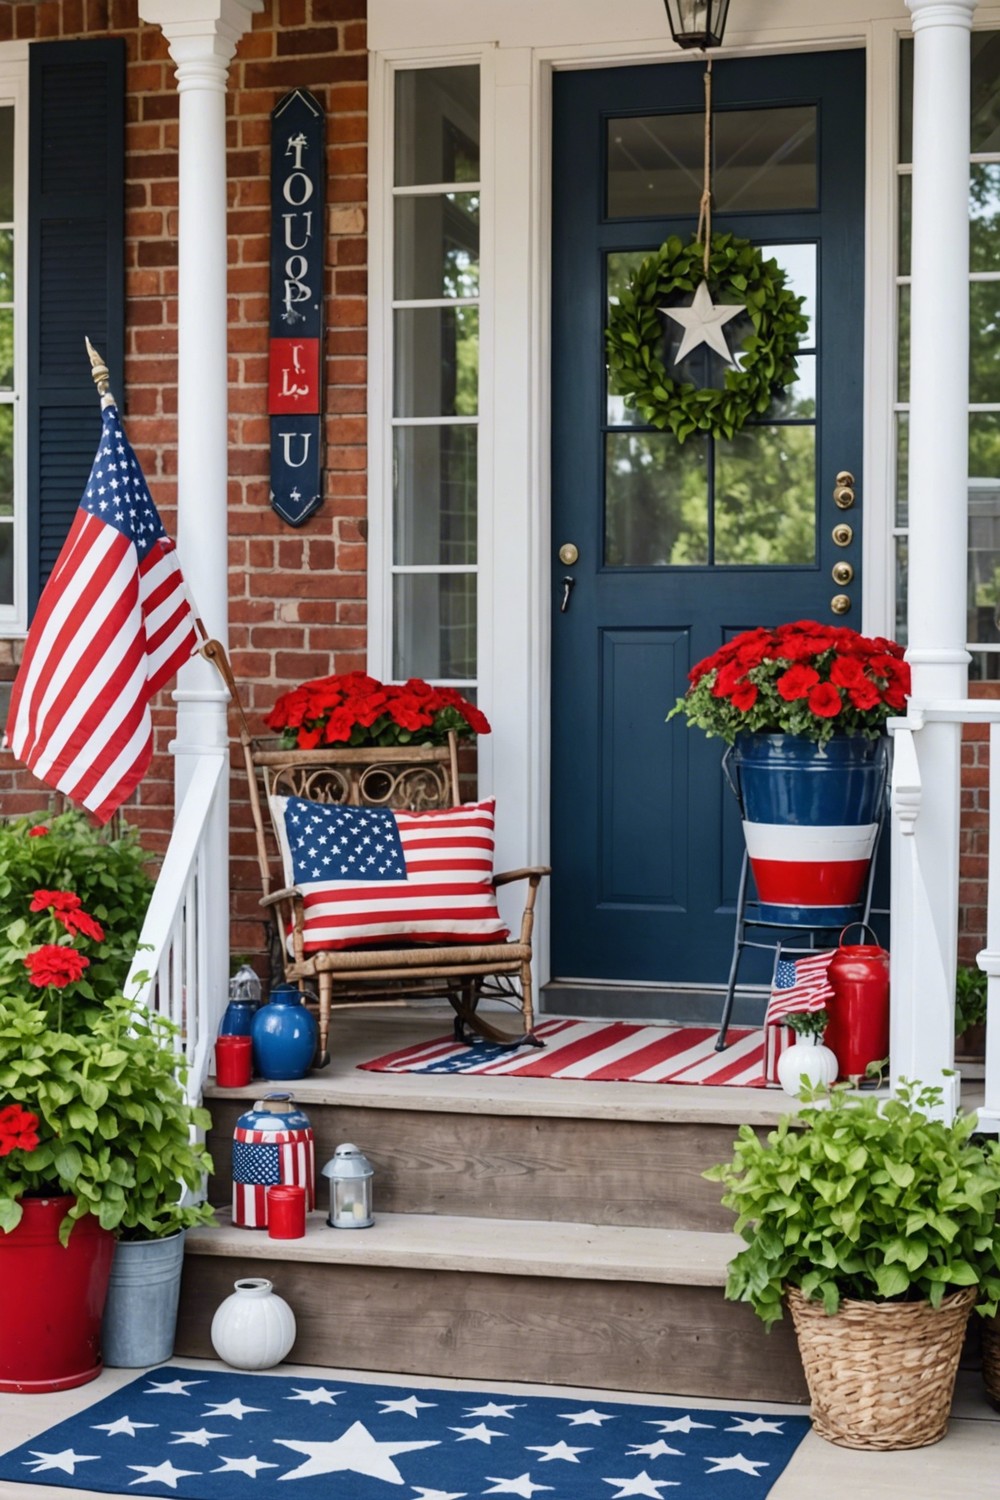 Add a Patriotic Touch with Red, White, and Blue